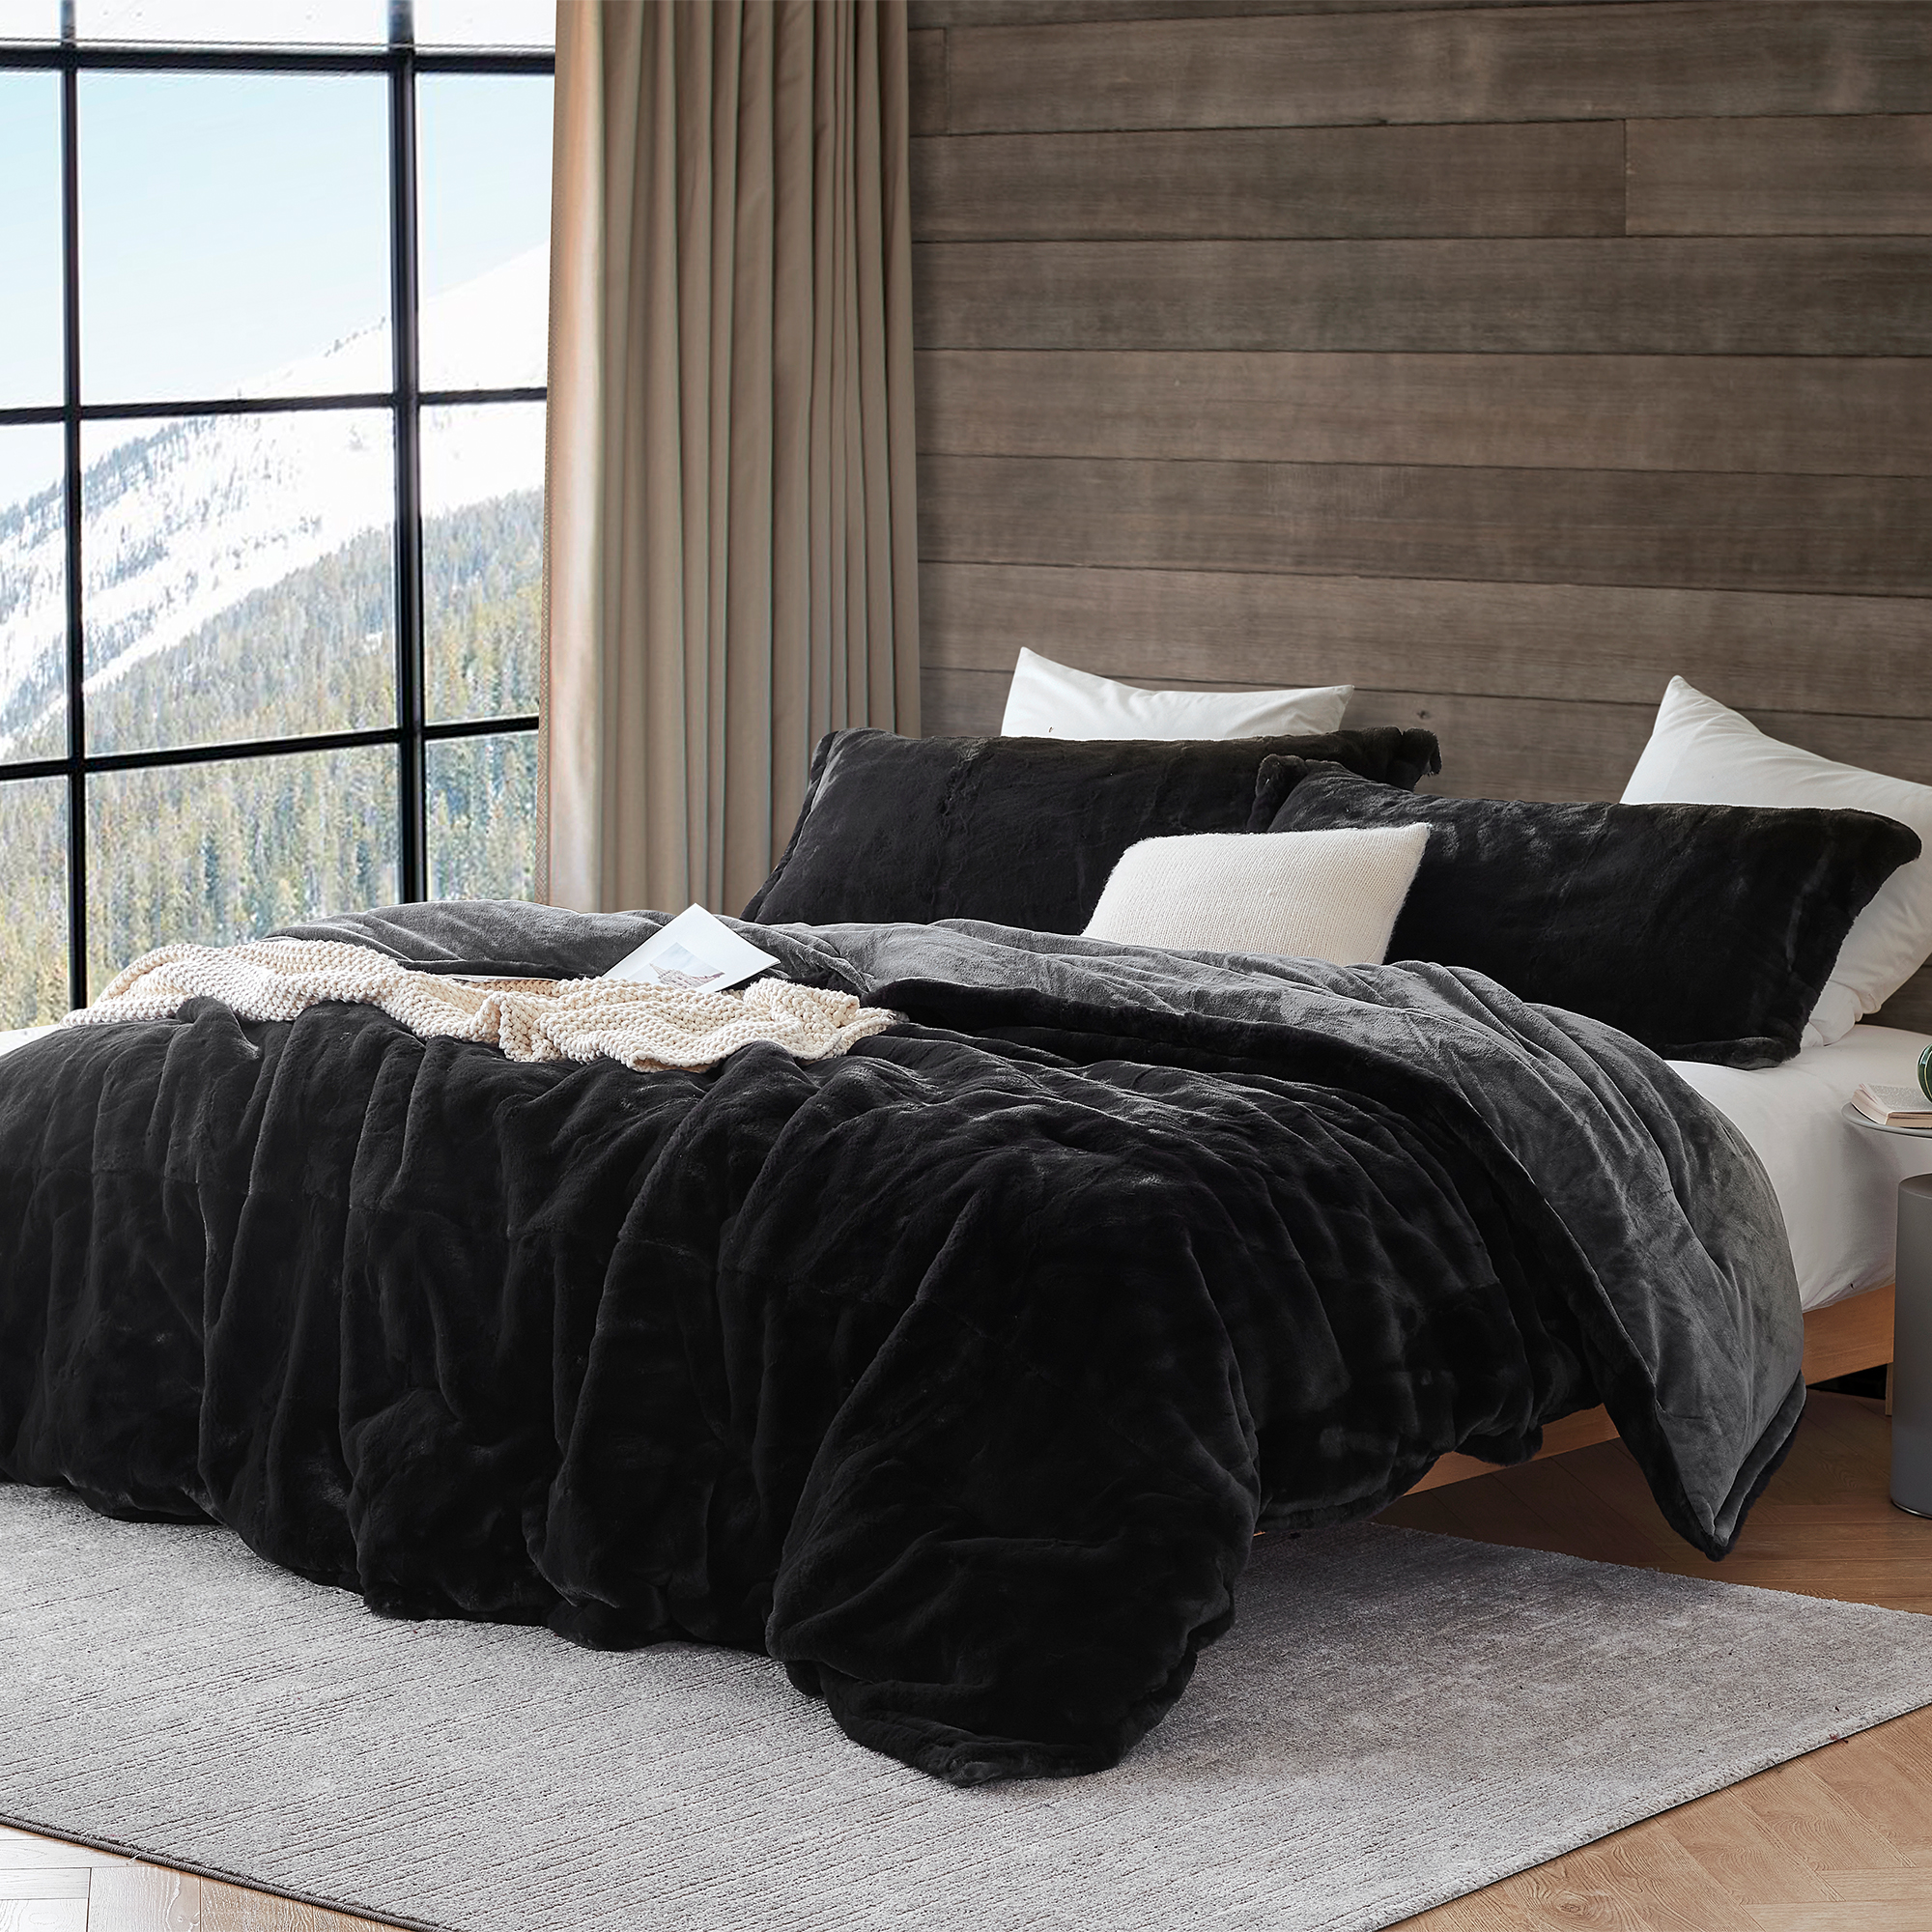 Chunky Bunny - Coma Inducer Oversized Queen Comforter - Rabbit Black